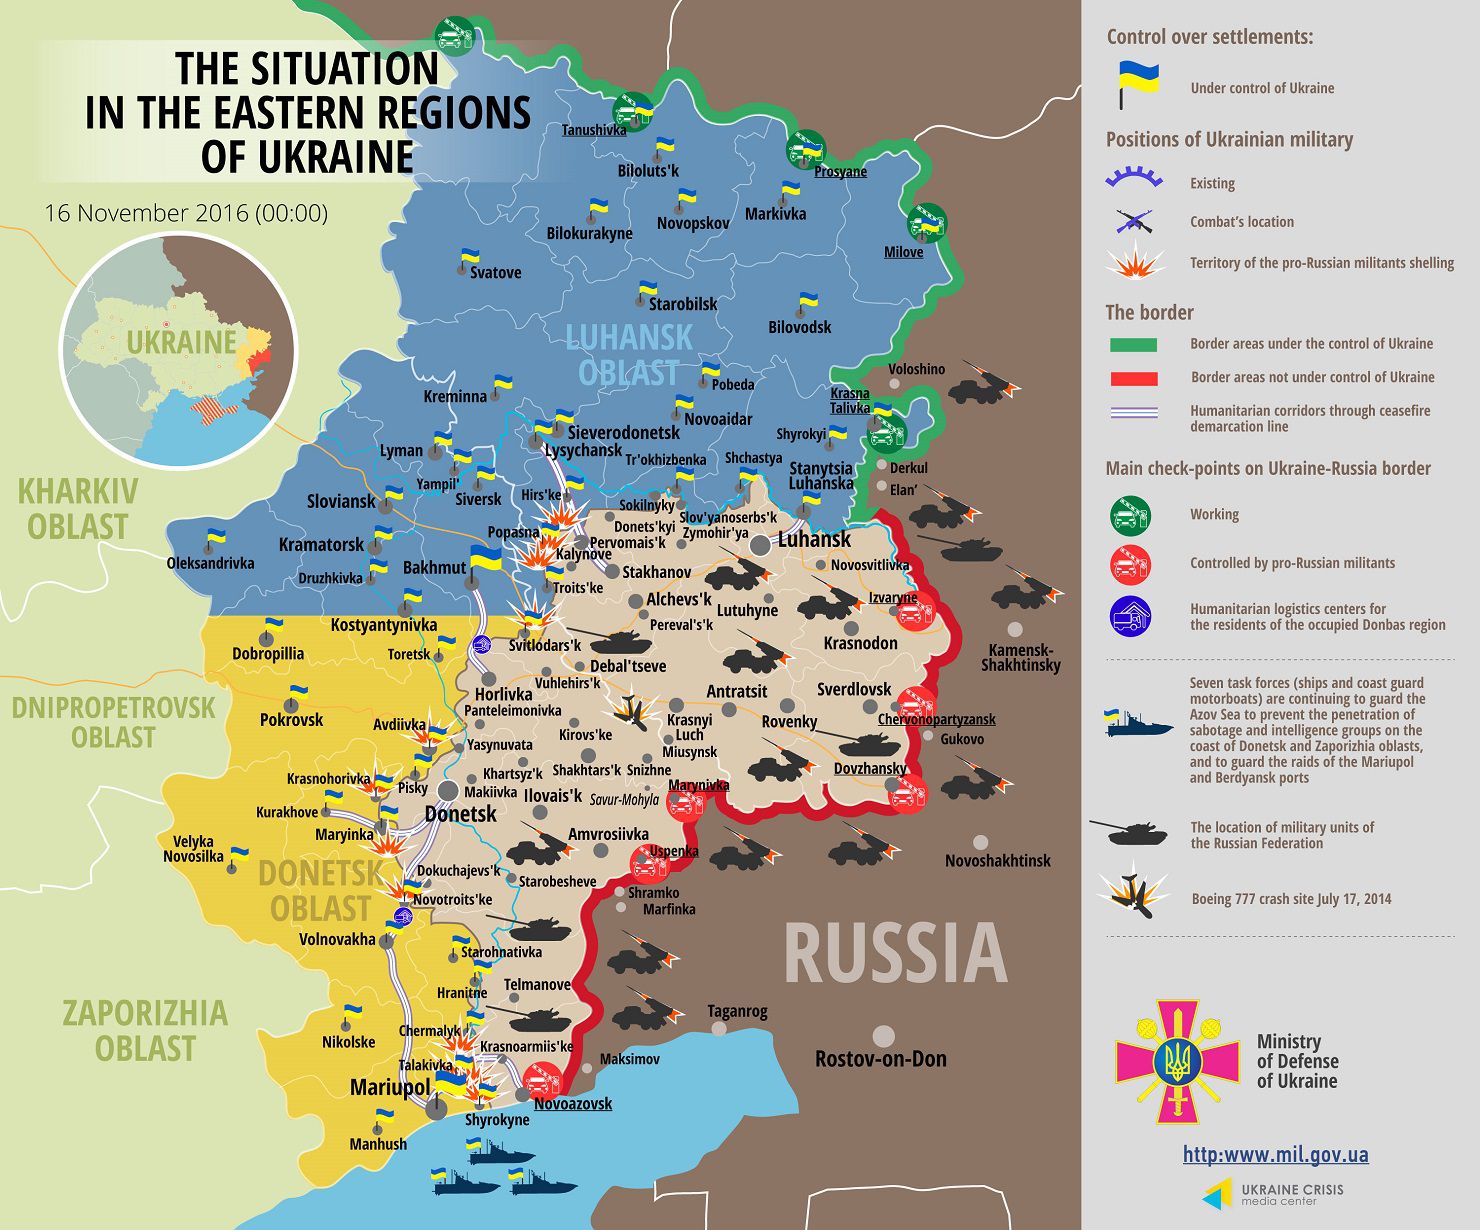 Mariupol sector remains epicenter of Russian attacks in Donbas